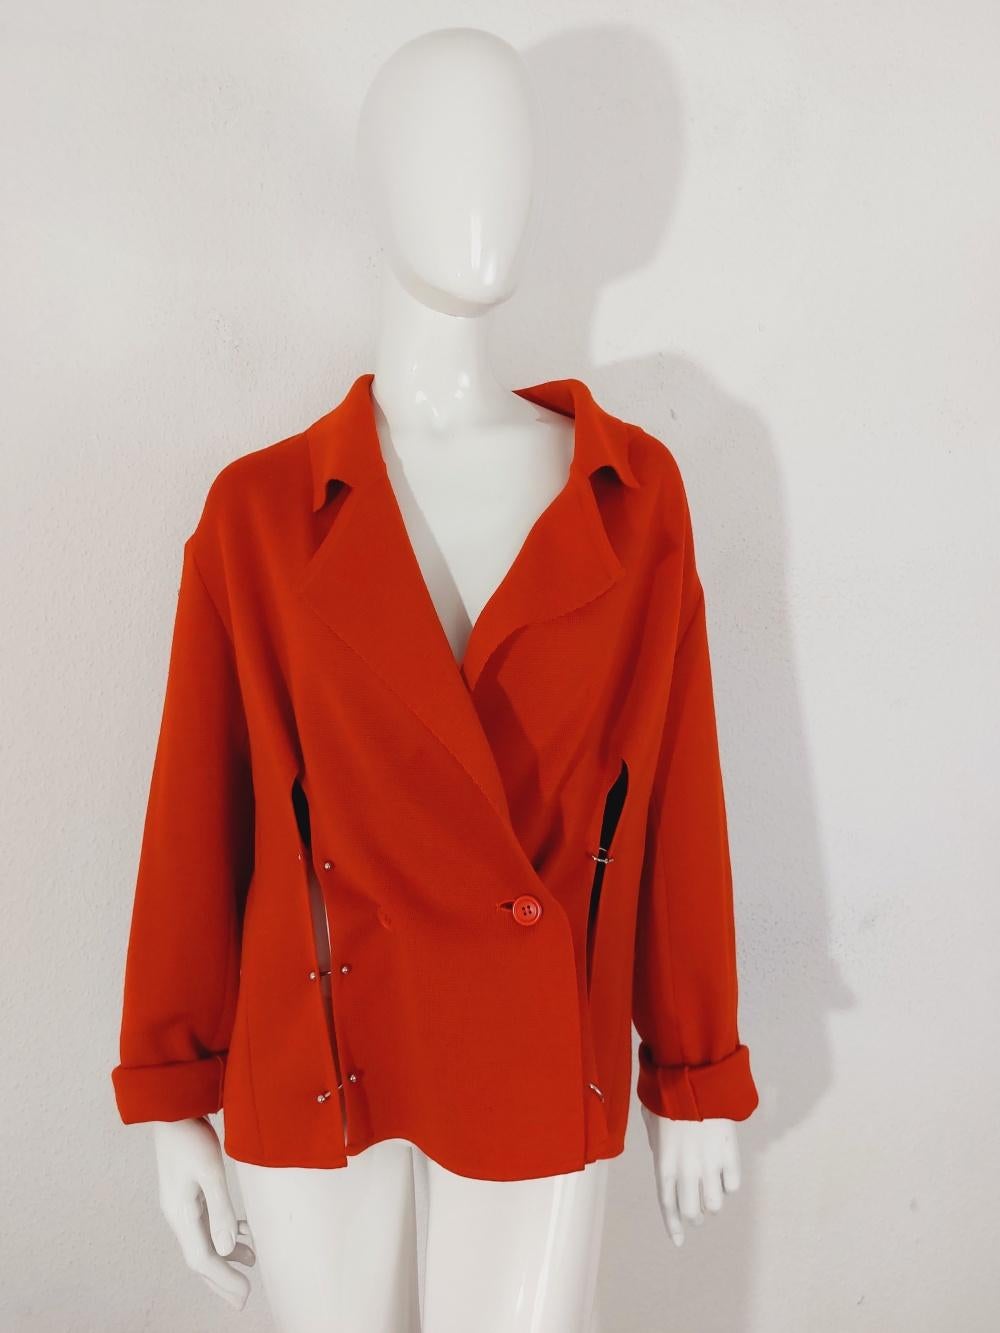 Issey Miyake Pleats Please Red Piercing Punk Deconstructed Rivet Coat Jacket For Sale 4